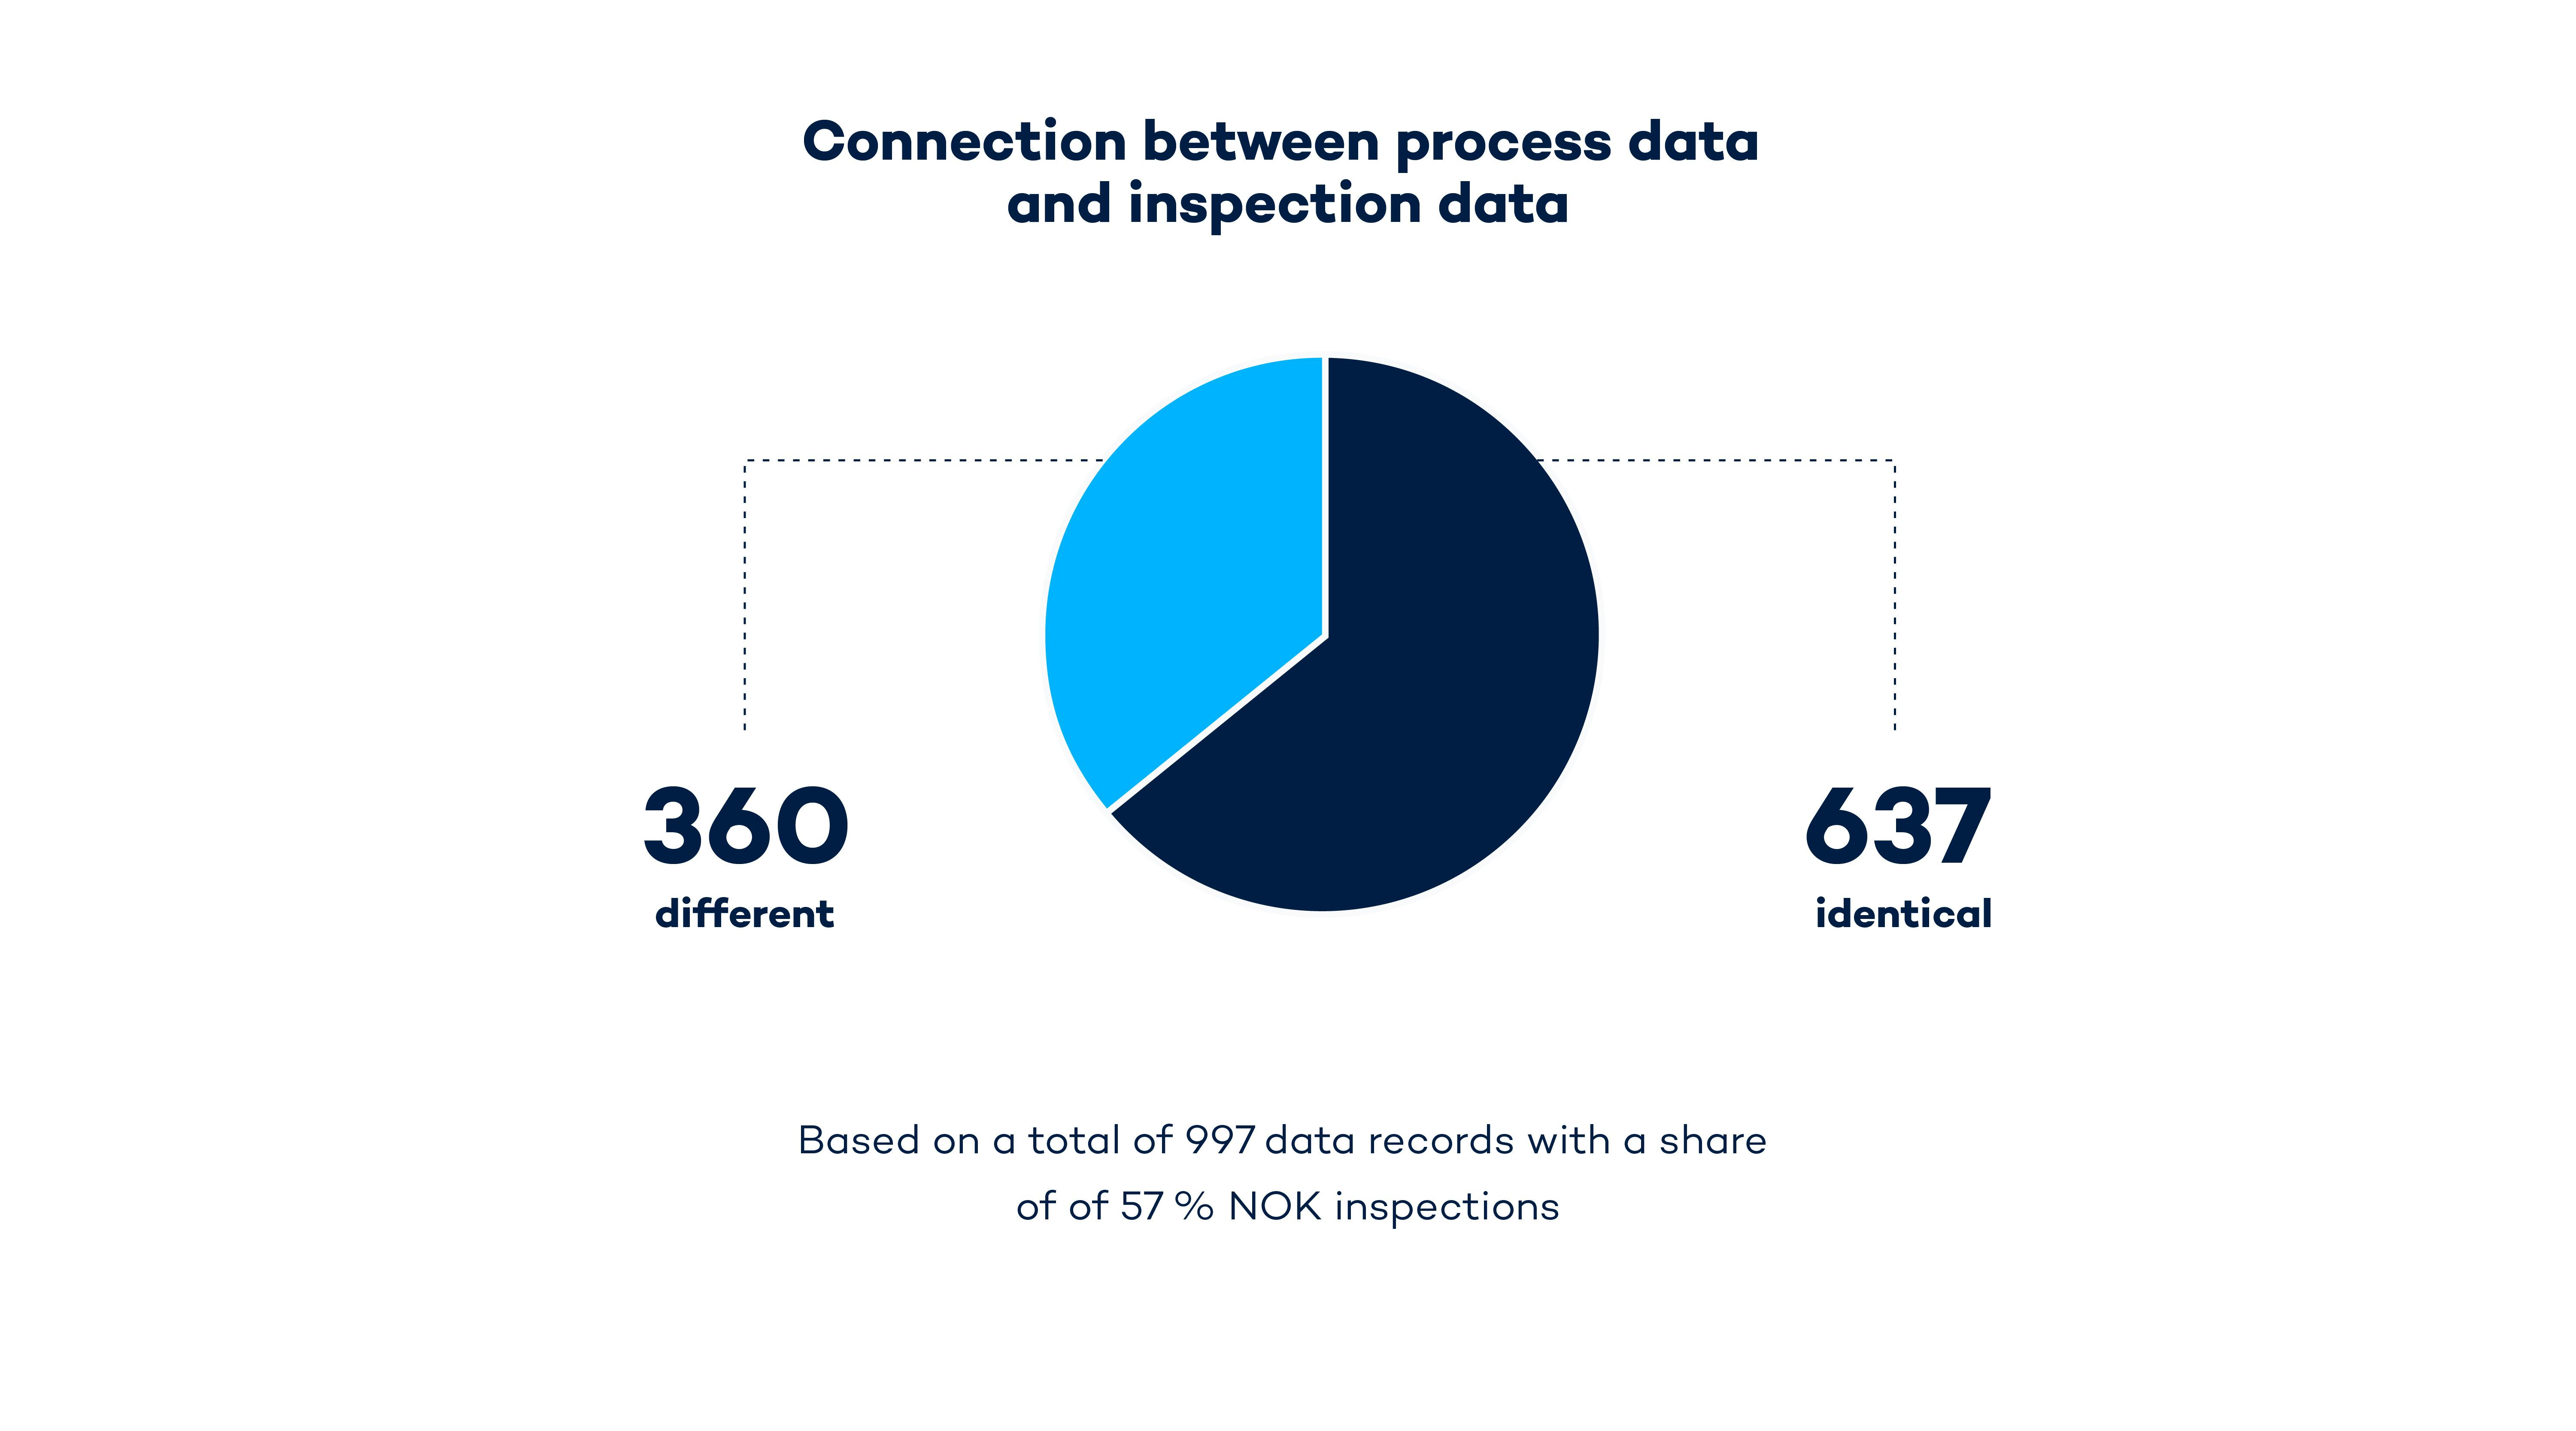 Correlations between test and process data were found in 60% of weld inspections.